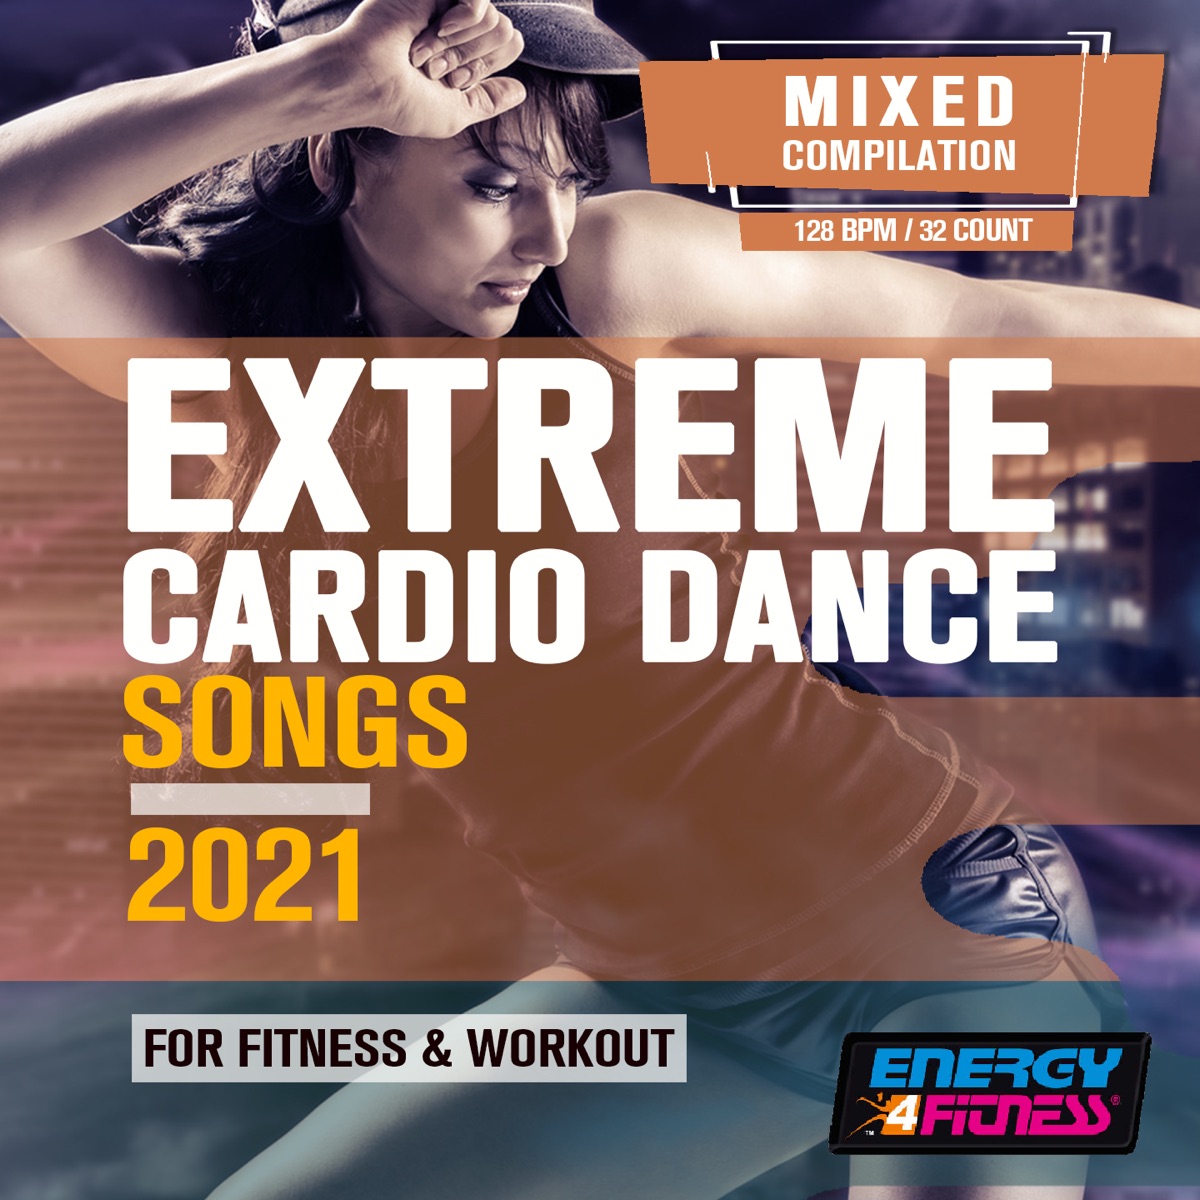 Extreme Cardio Dance Songs For Fitness & Workout 2021 (15 Tracks Non-Stop  Mixed Compilation for Fitness & Workout - 128 Bpm / 32 Count) - Album by  Various Artists - Apple Music